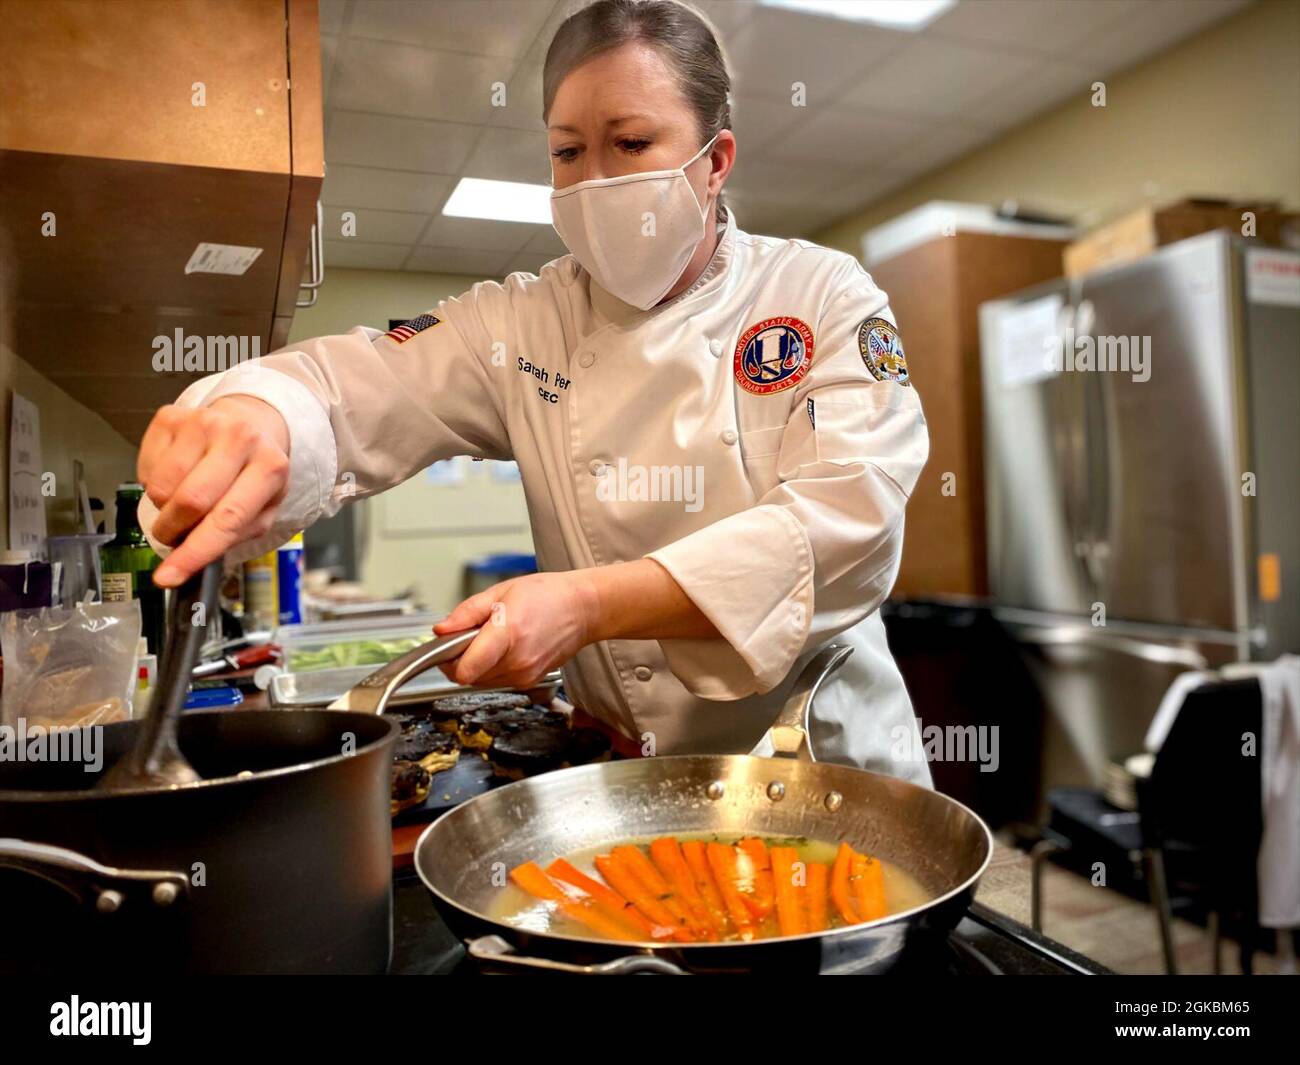 Sgt. 1st Class Sarah Perry, enlisted aide to Lt. Gen. Jody J. Daniels, Chief of Army Reserve and Commanding General, U.S. Army Reserve Command, prepares a meal for senior leaders during a visit from Honorable John E. Whitley, acting Secretary of the U.S. Army, March 5, 2021. Stock Photo